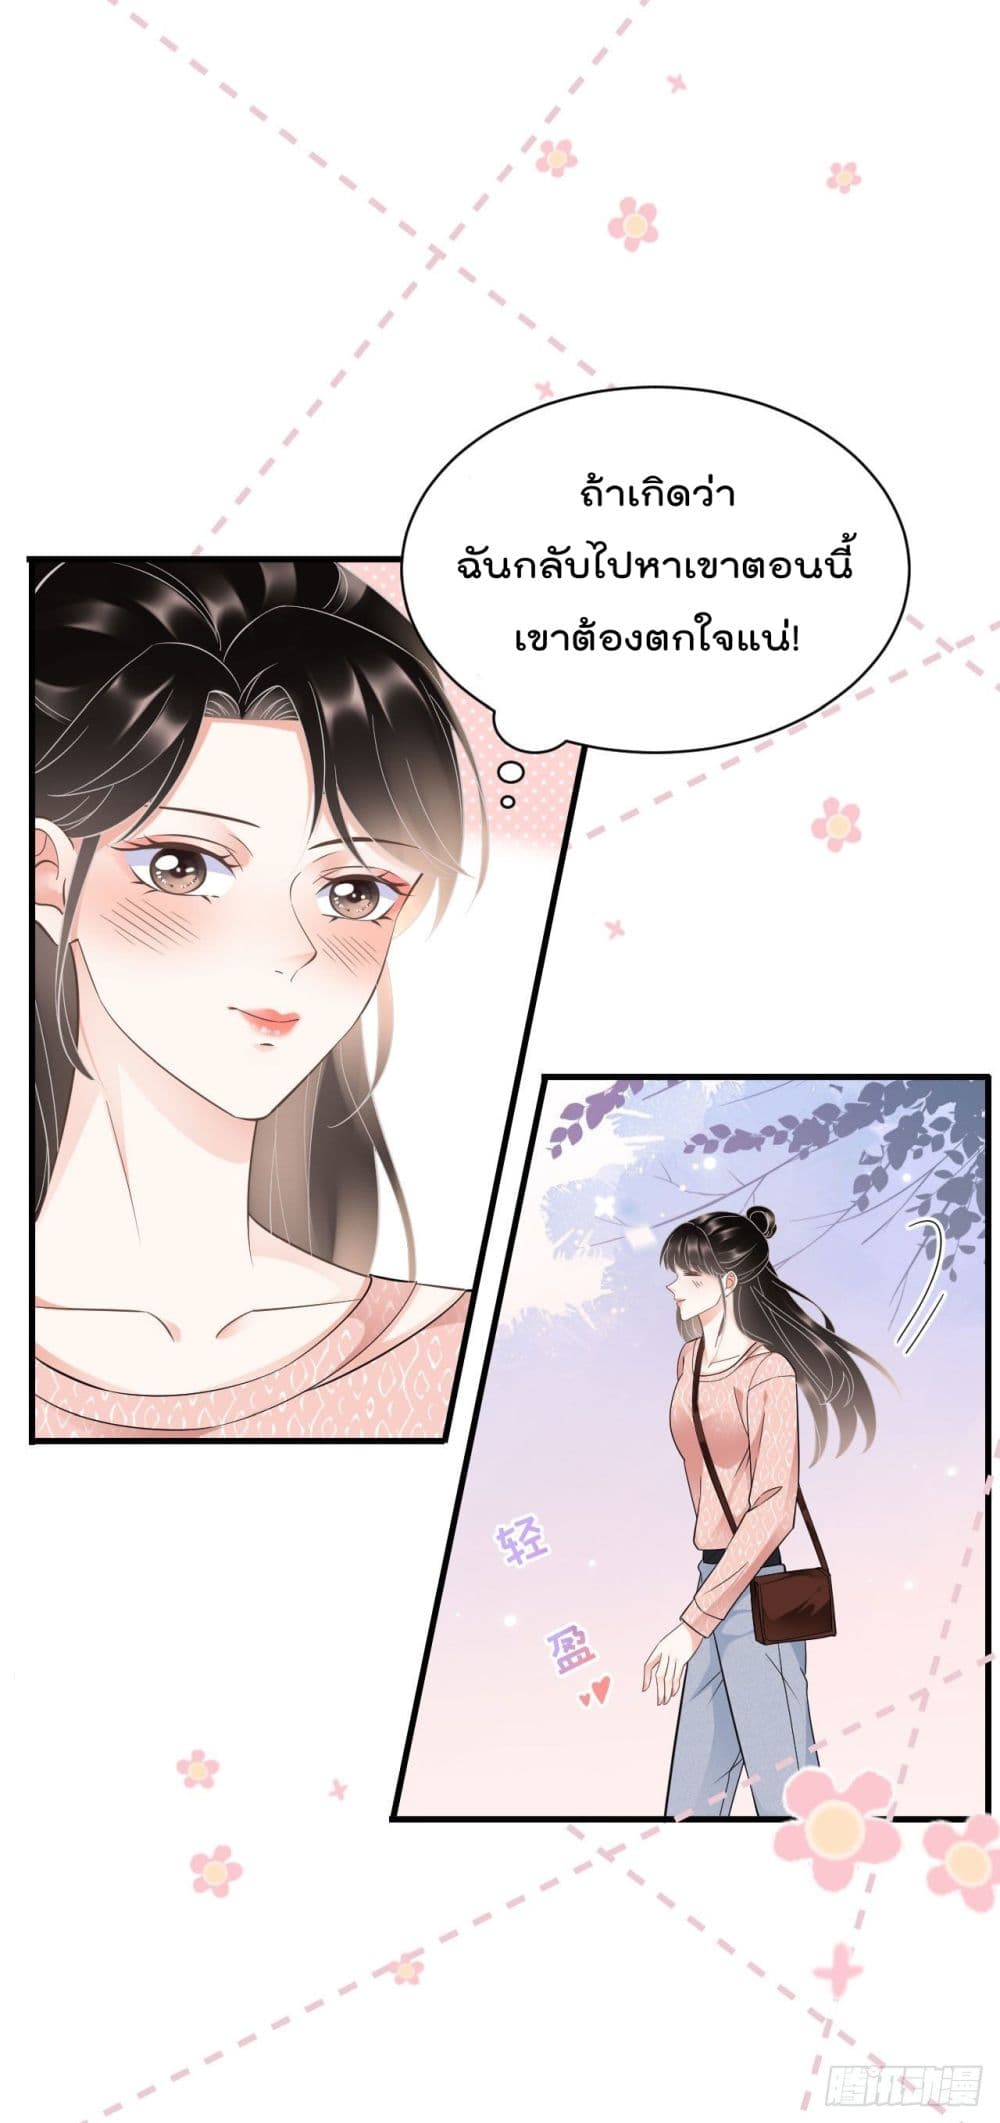 What Can the Eldest Lady Have คุณหนูใหญ่ ทำไมคุณร้ายอย่างนี้ 10-10